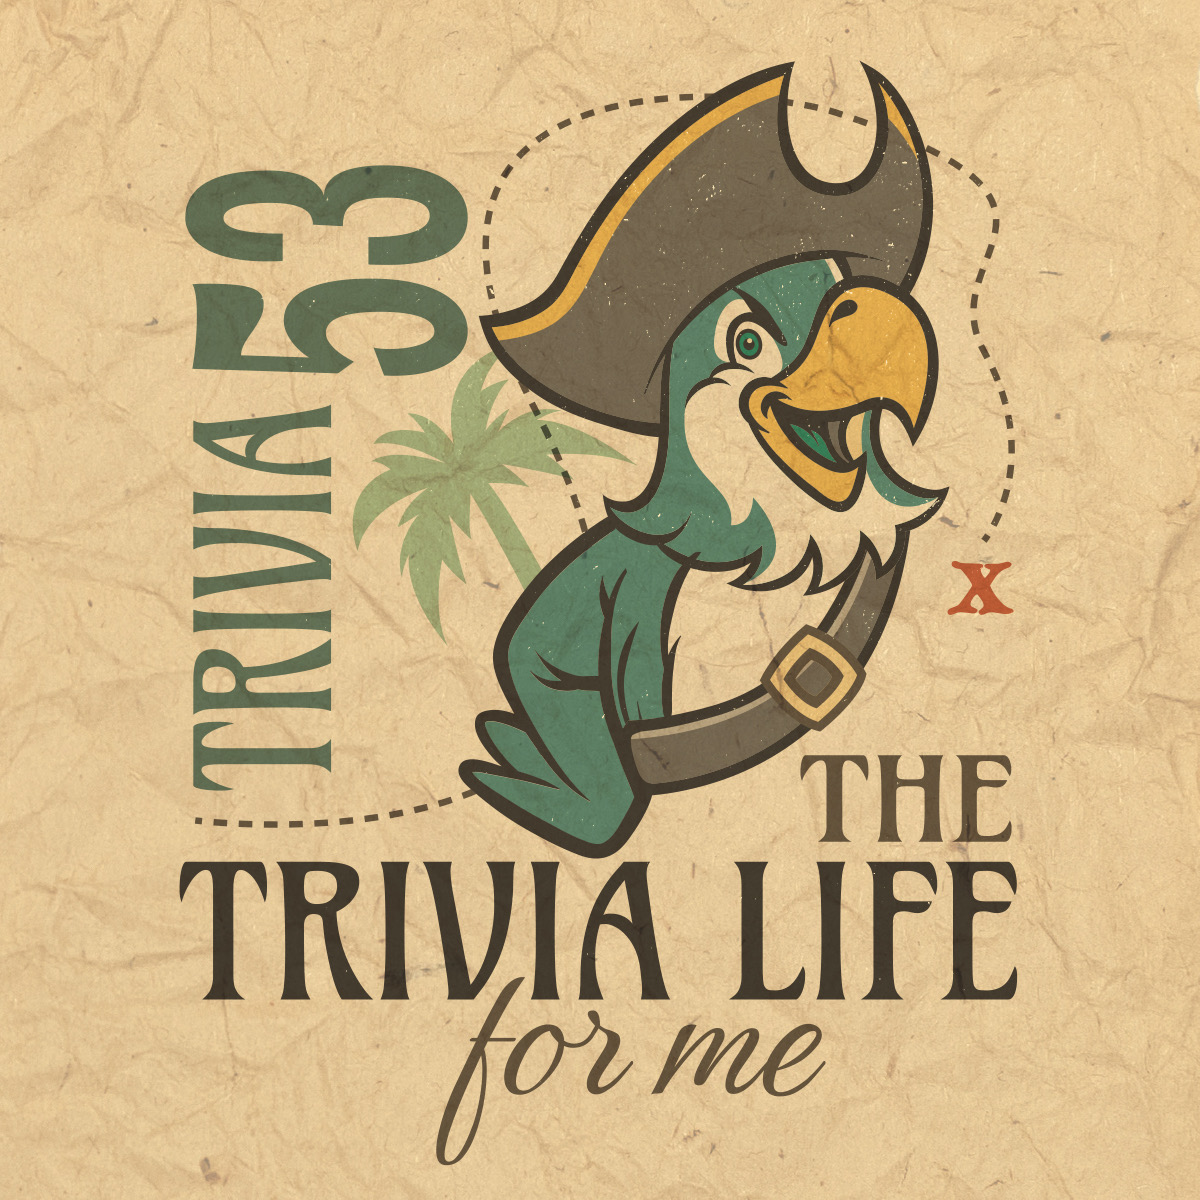 UW-Stevens Point’s 90FM WWSP will host “Trivia 53: The Trivia Life for Me” April 14-16, bringing together hundreds of teams for the world’s largest trivia contest.